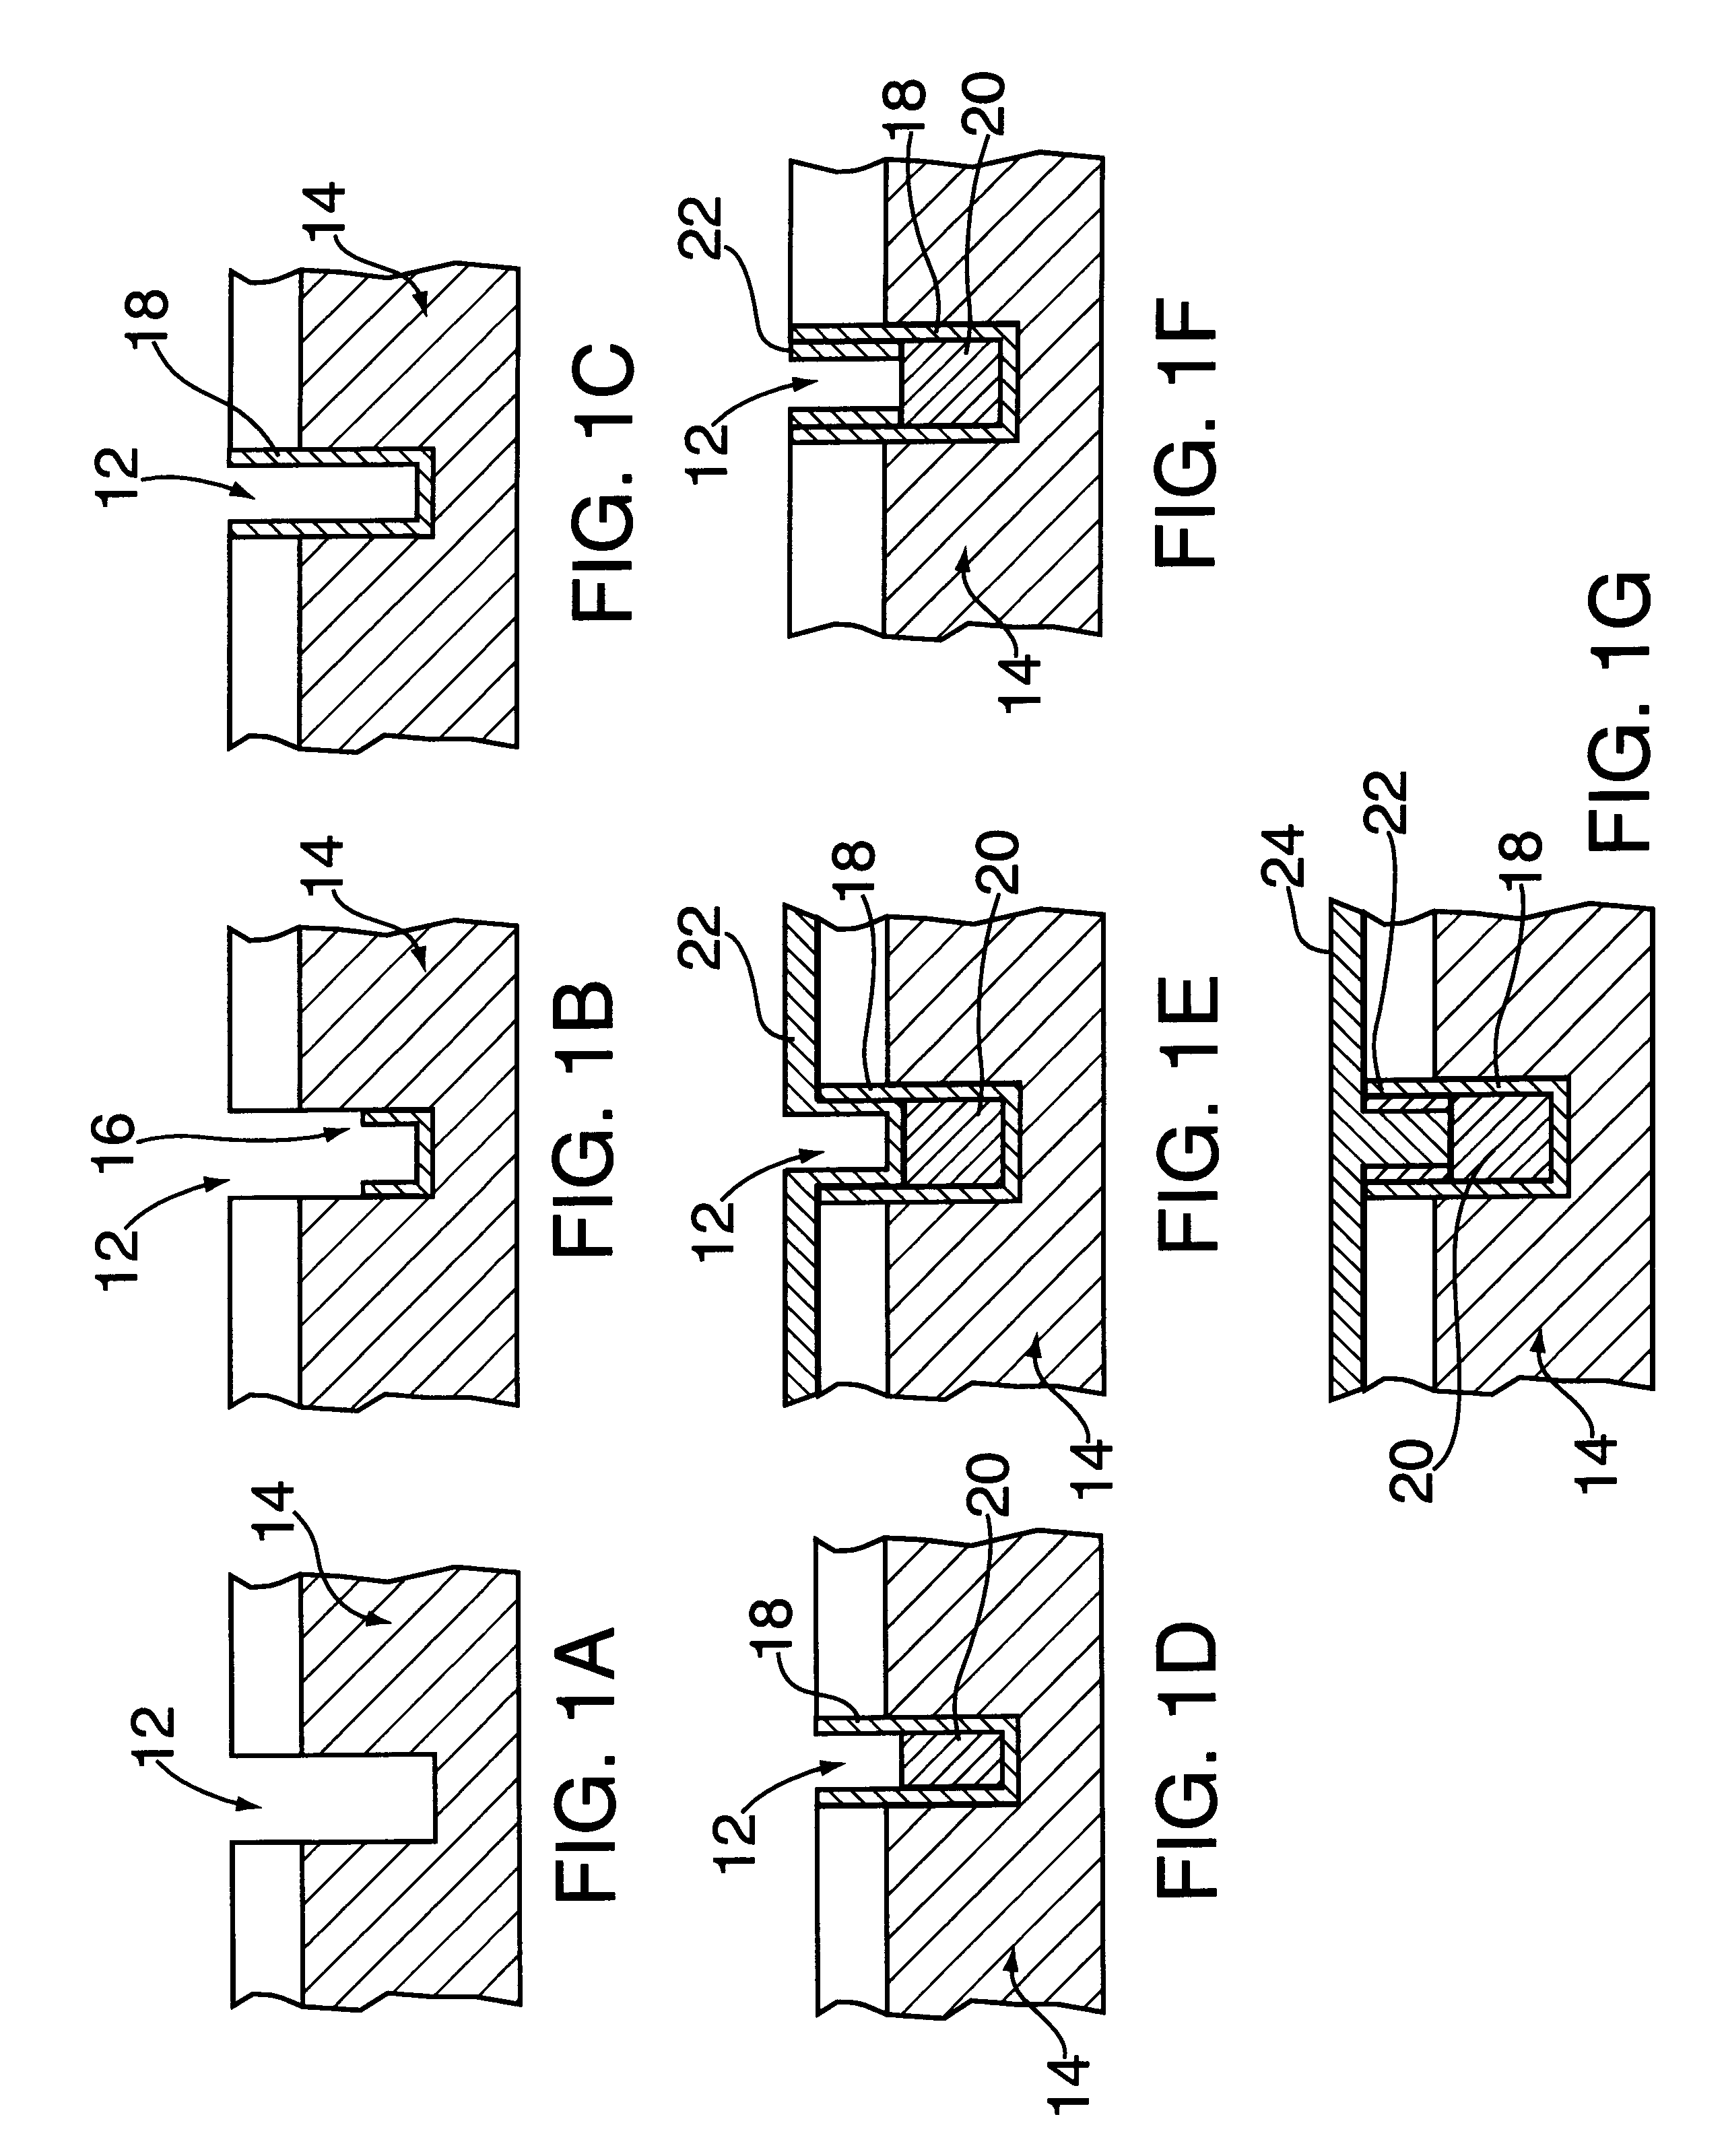 Method and apparatus for sequentially etching a wafer using anisotropic and isotropic etching